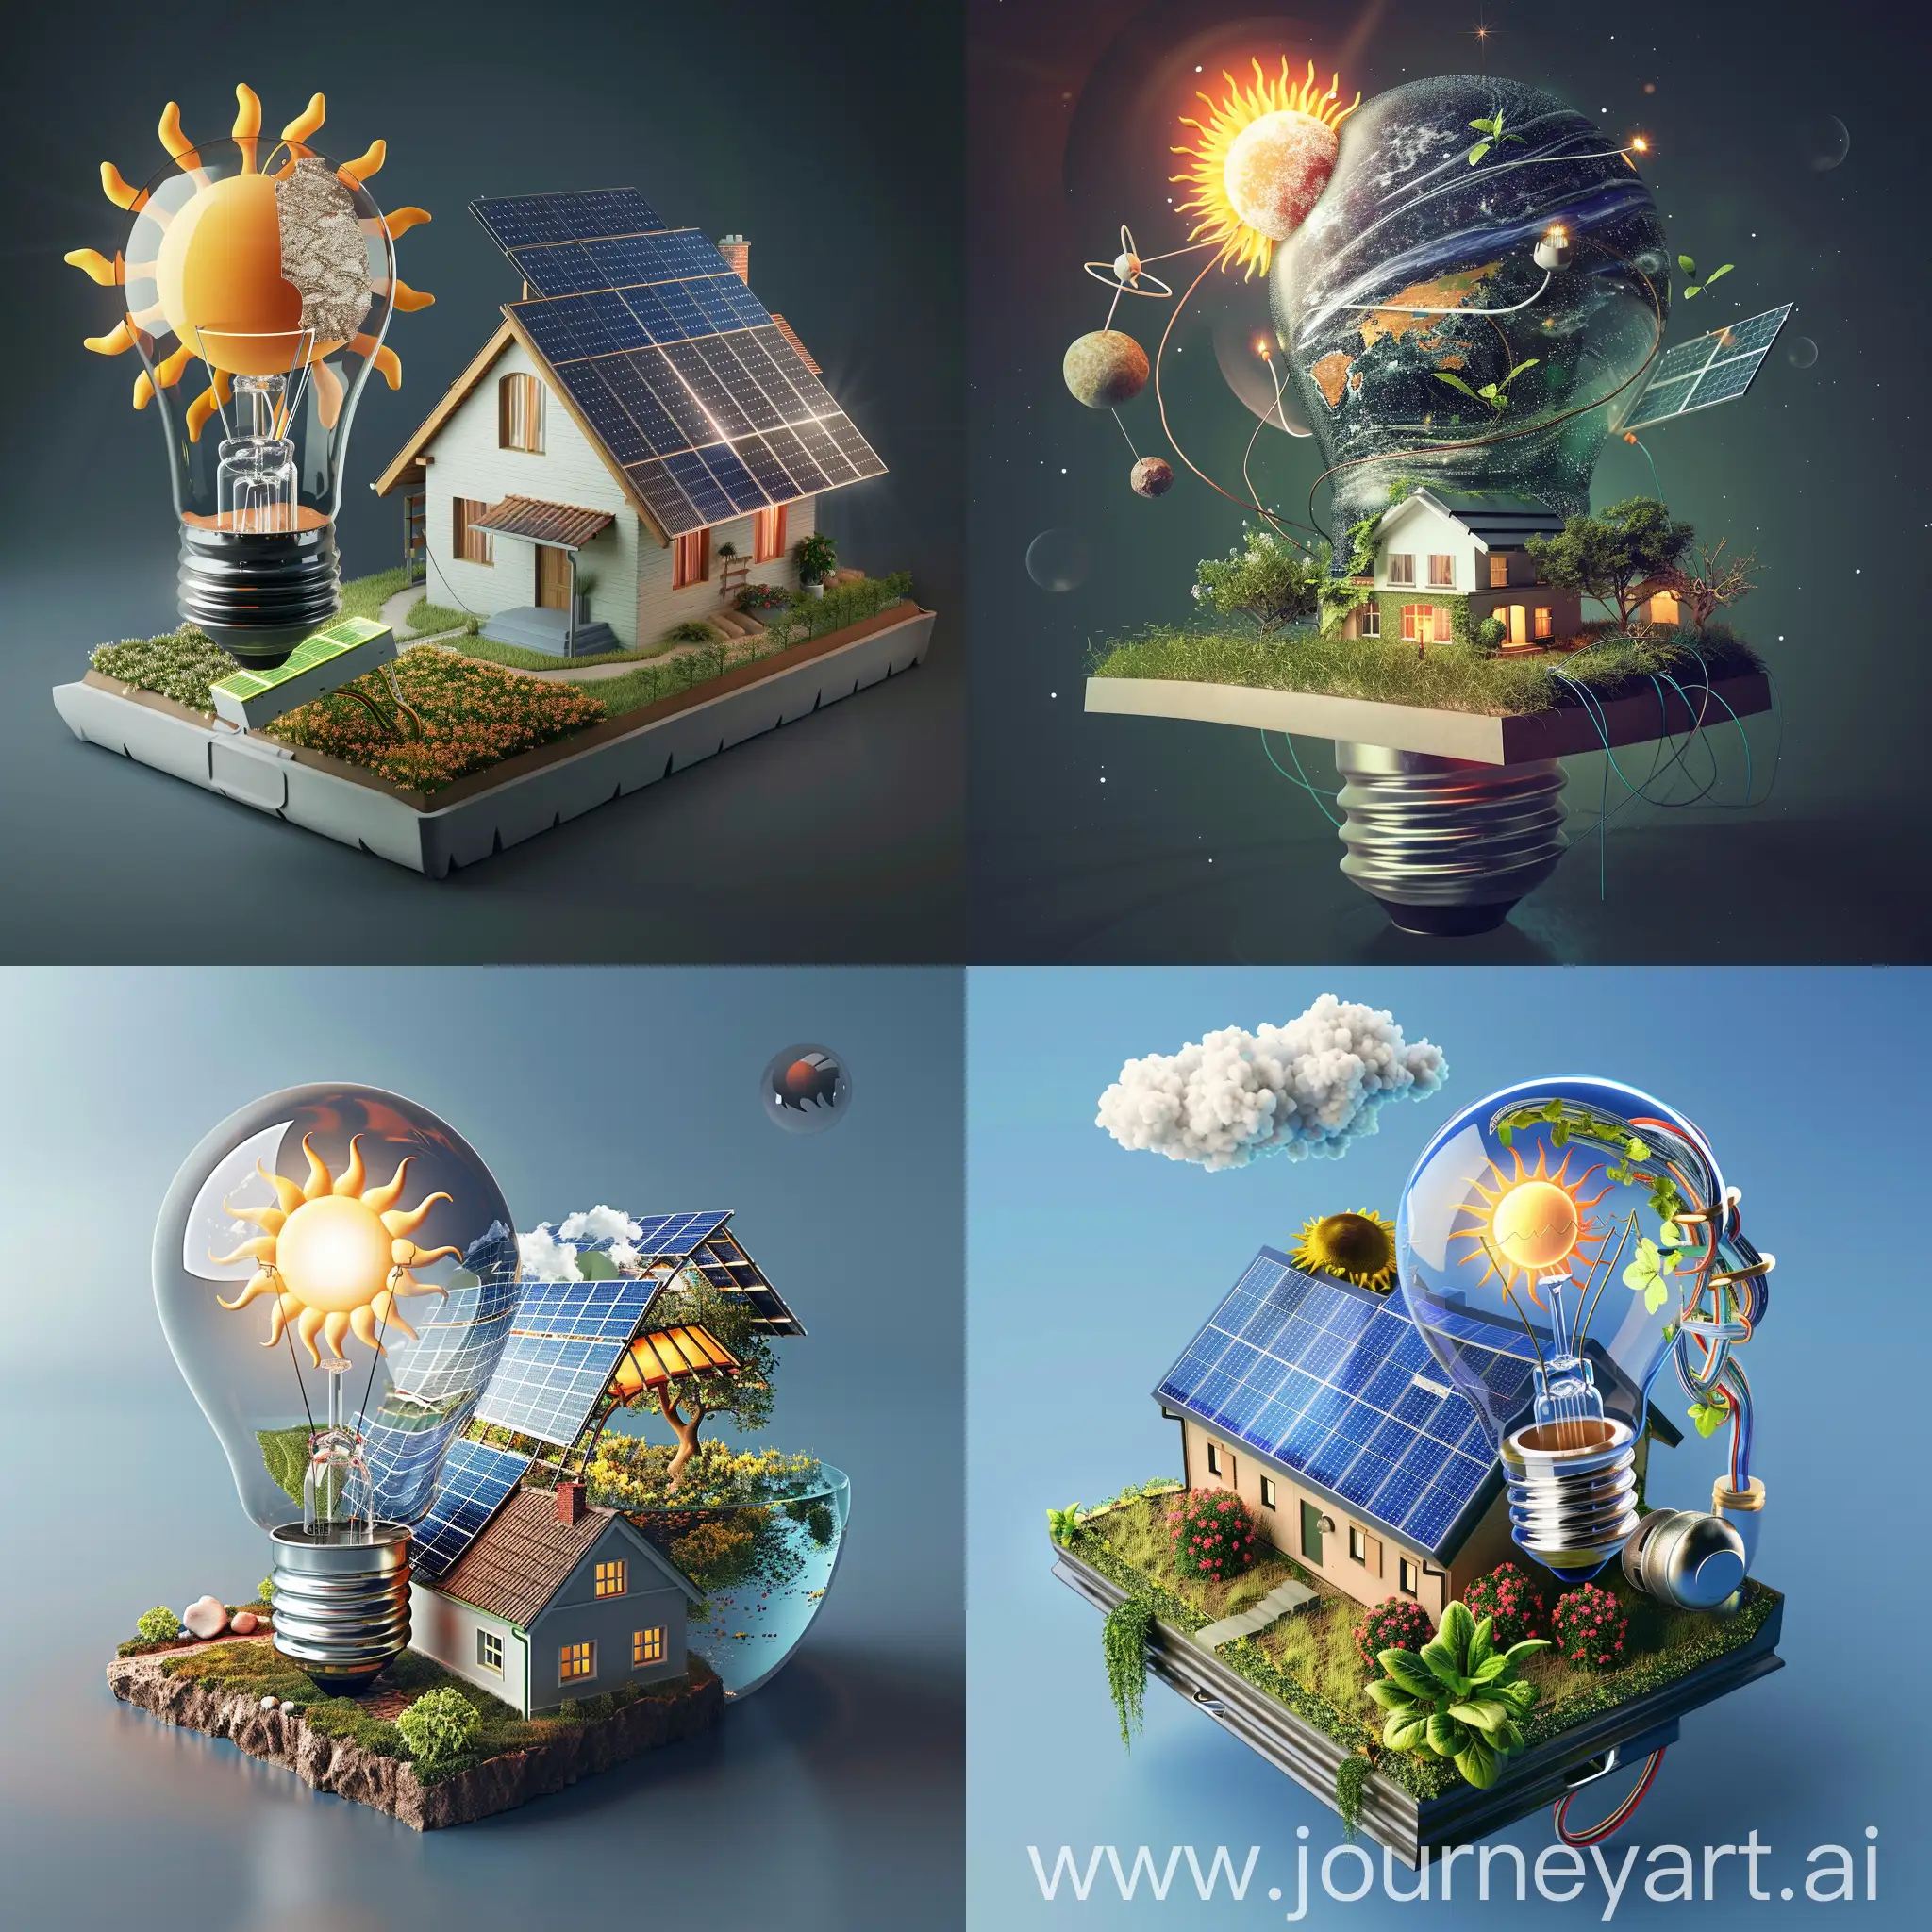 A socket attached to a creative bulb contains solar energy system and sun,and a house contains solar panels.